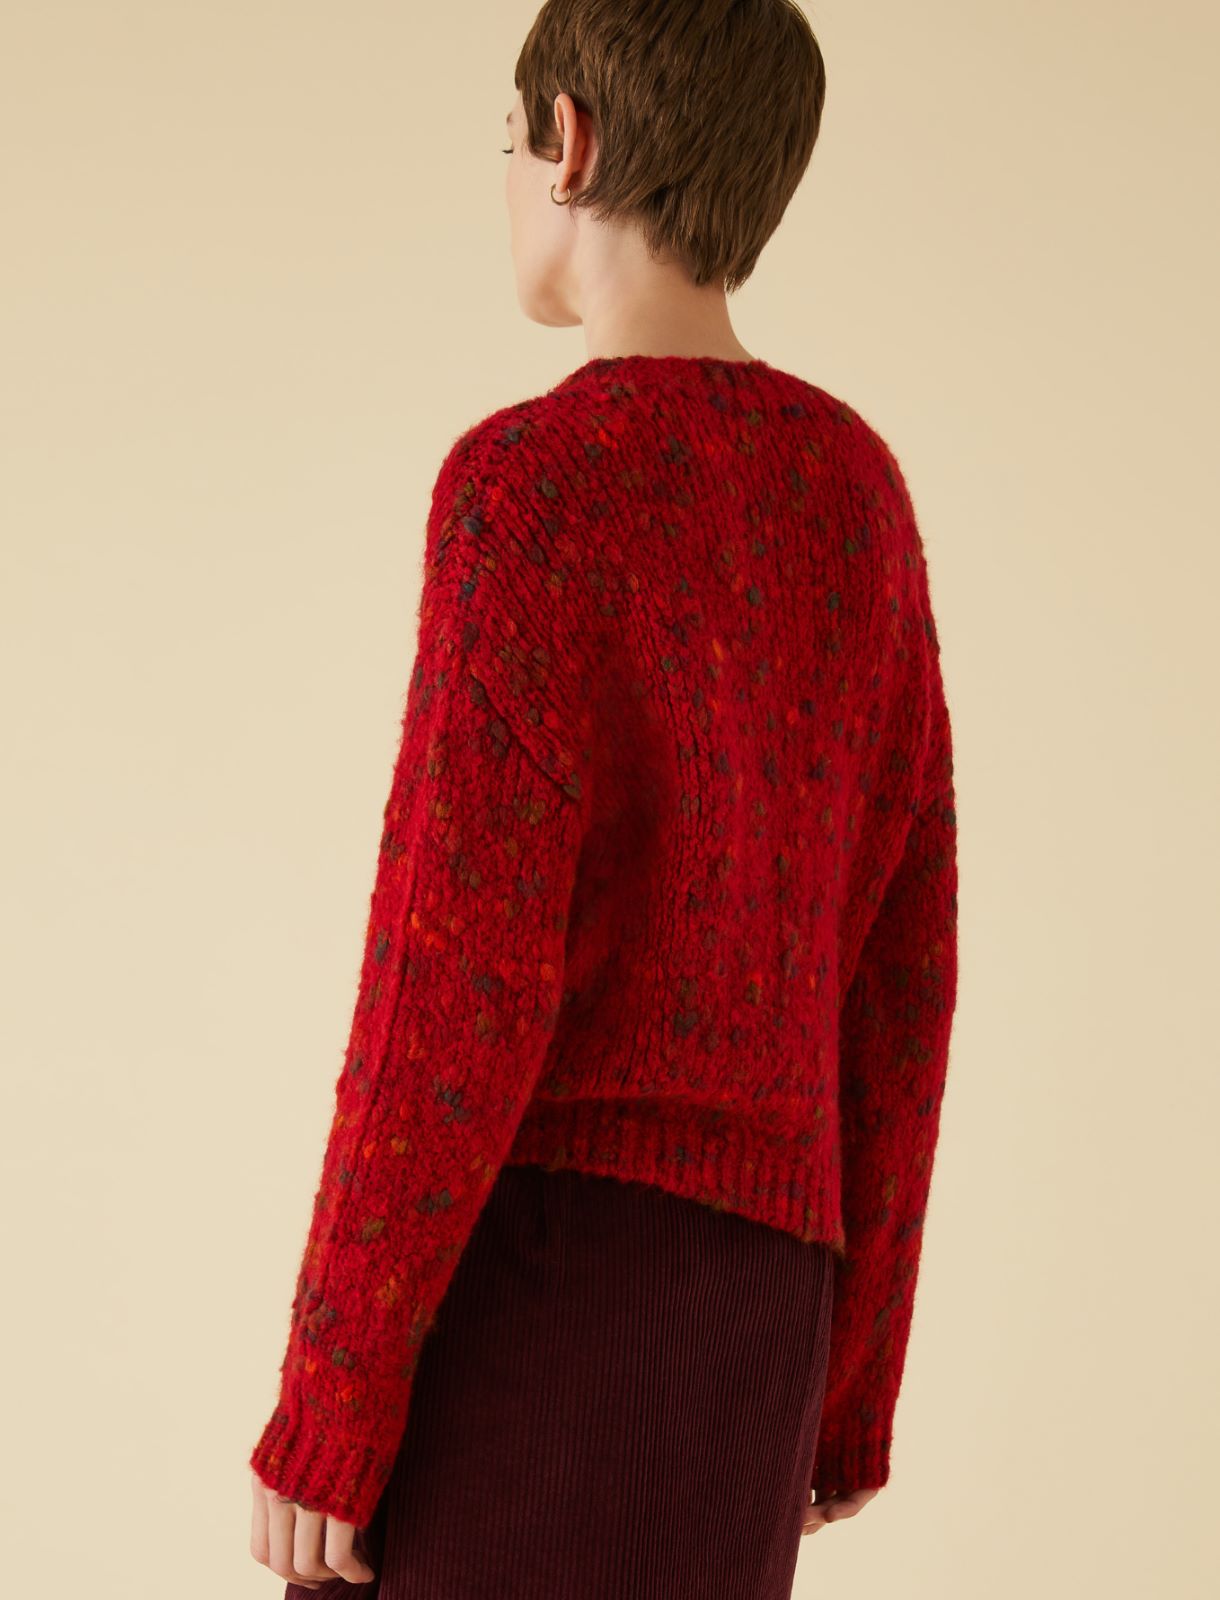 Patterned sweater - Sour cherry - Marella - 2